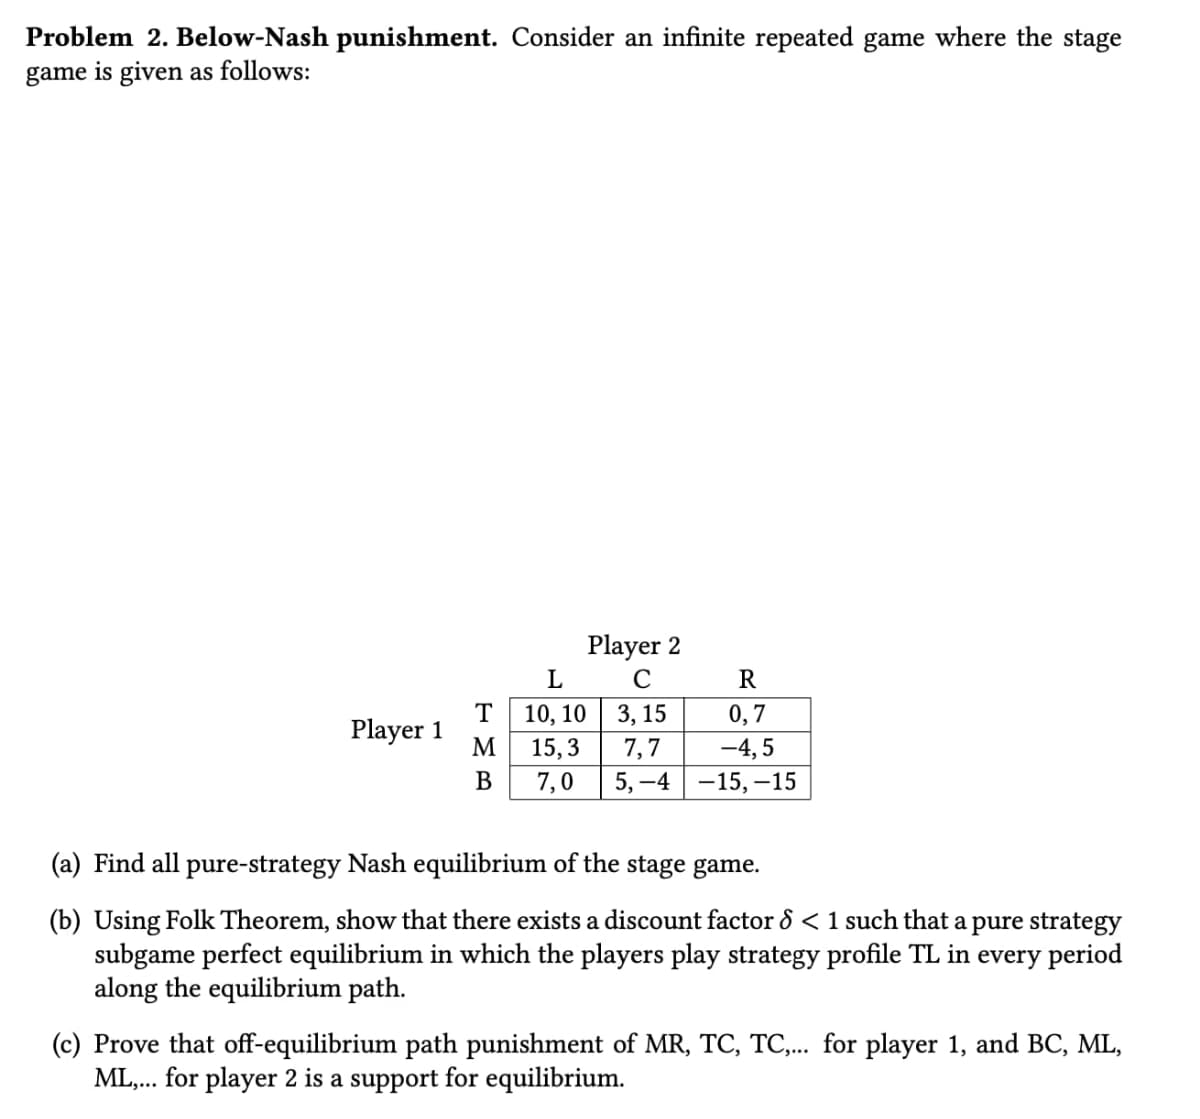 Problem 2. Below-Nash punishment. Consider an infinite repeated game where the stage
game is given as follows:
Player 2
L
C
R
T
10,10
3, 15
0,7
Player 1
M
15,3
7,7
-4,5
B
7,0
5,-4 -15, 15
(a) Find all pure-strategy Nash equilibrium of the stage game.
(b) Using Folk Theorem, show that there exists a discount factor 8 < 1 such that a pure strategy
subgame perfect equilibrium in which the players play strategy profile TL in every period
along the equilibrium path.
(c) Prove that off-equilibrium path punishment of MR, TC, TC,... for player 1, and BC, ML,
ML,... for player 2 is a support for equilibrium.